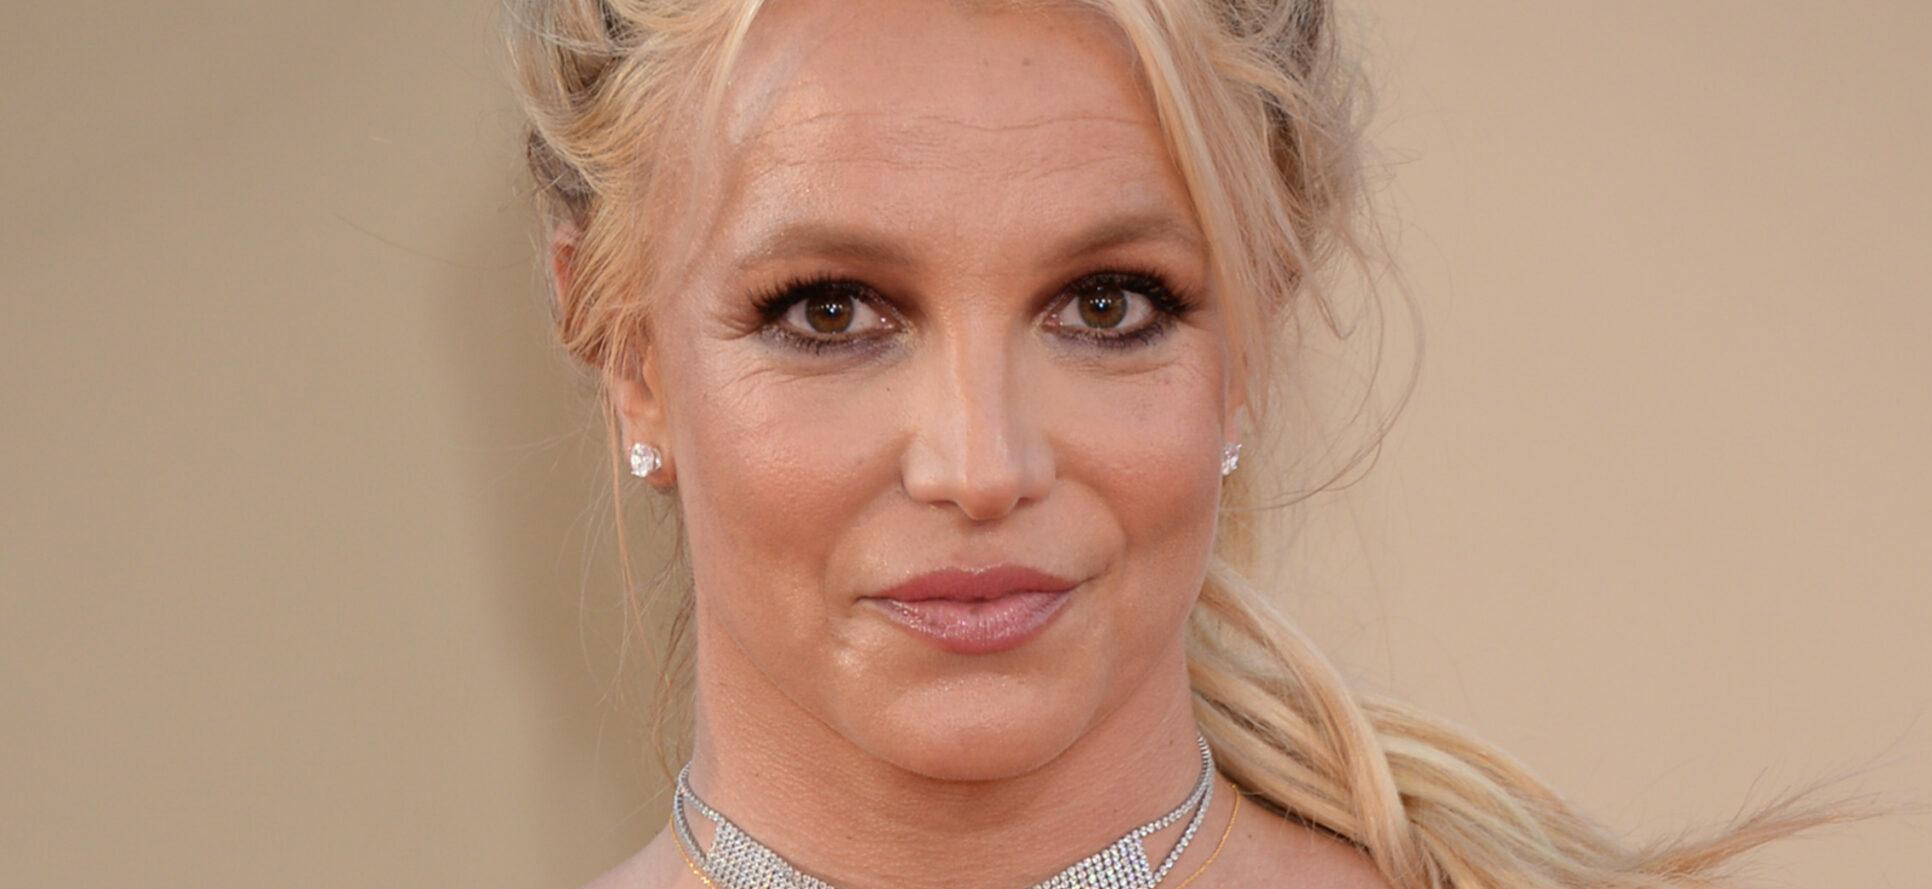 Britney Spears Reveals What Drugs She Took During Her Partying Days